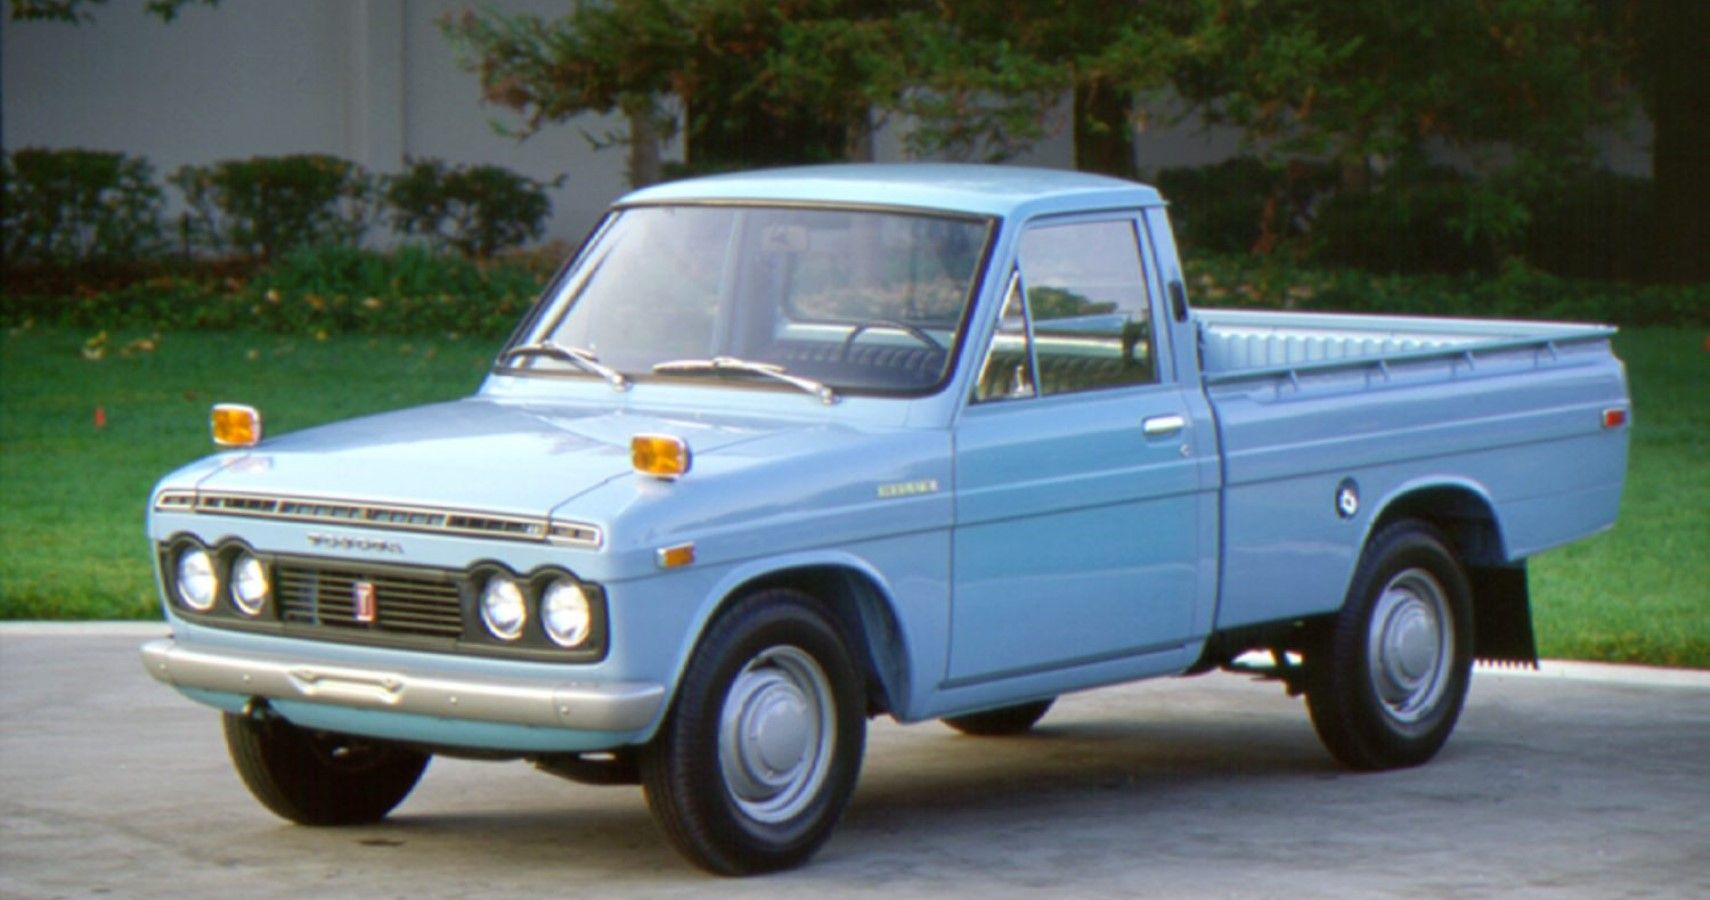 1969 Toyota Hilux front third quarter view